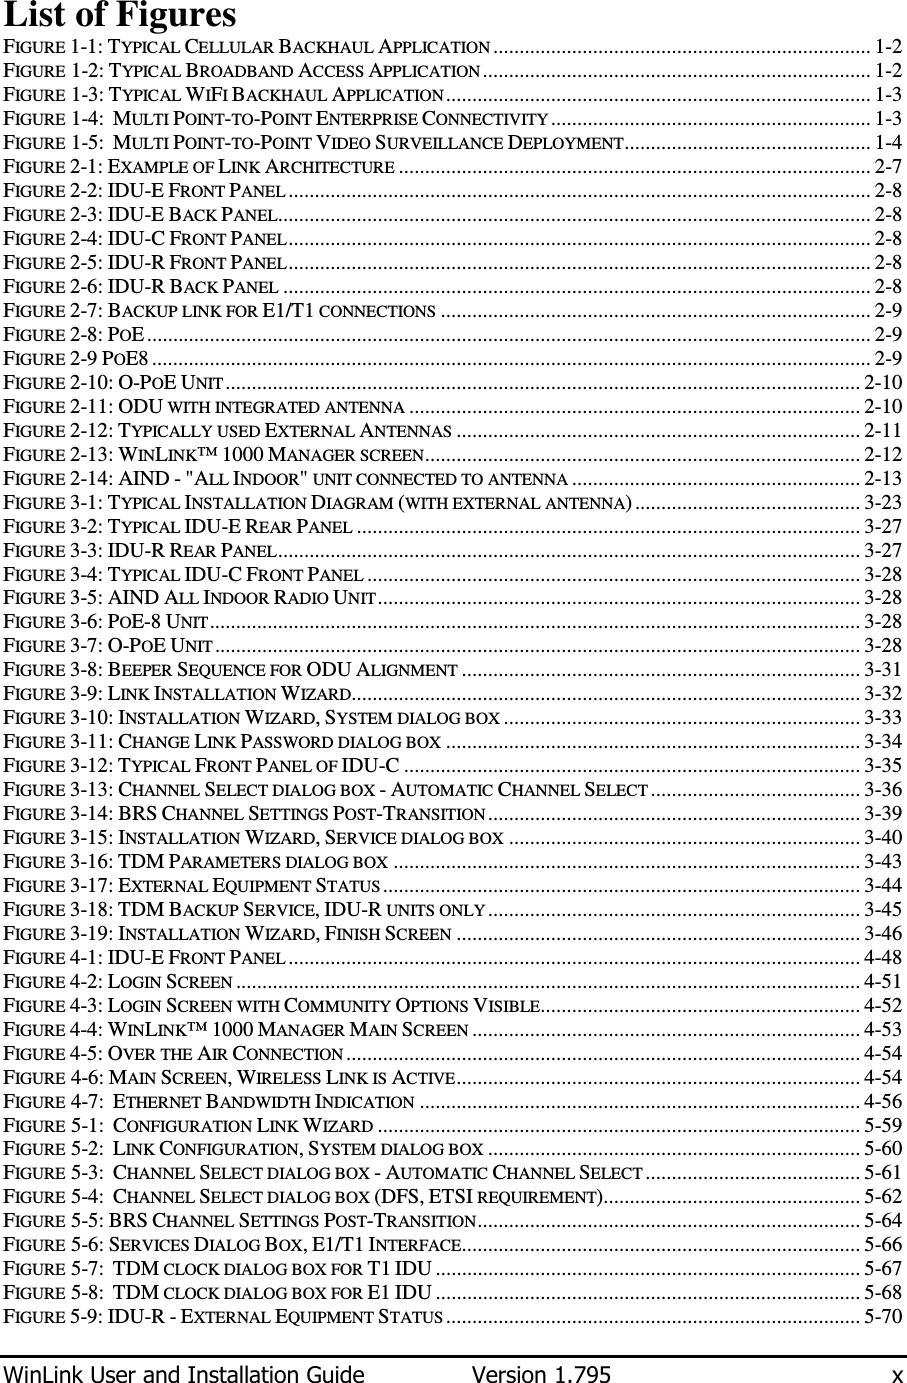  WinLink User and Installation Guide  Version 1.795  x  List of Figures FIGURE  1-1: TYPICAL CELLULAR BACKHAUL APPLICATION ........................................................................ 1-2 FIGURE  1-2: TYPICAL BROADBAND ACCESS APPLICATION .......................................................................... 1-2 FIGURE  1-3: TYPICAL WIFI BACKHAUL APPLICATION ................................................................................. 1-3 FIGURE  1-4:  MULTI POINT-TO-POINT ENTERPRISE CONNECTIVITY ............................................................. 1-3 FIGURE  1-5:  MULTI POINT-TO-POINT VIDEO SURVEILLANCE DEPLOYMENT............................................... 1-4 FIGURE  2-1: EXAMPLE OF LINK ARCHITECTURE .......................................................................................... 2-7 FIGURE  2-2: IDU-E FRONT PANEL ............................................................................................................... 2-8 FIGURE  2-3: IDU-E BACK PANEL................................................................................................................. 2-8 FIGURE  2-4: IDU-C FRONT PANEL............................................................................................................... 2-8 FIGURE  2-5: IDU-R FRONT PANEL............................................................................................................... 2-8 FIGURE  2-6: IDU-R BACK PANEL ................................................................................................................ 2-8 FIGURE  2-7: BACKUP LINK FOR E1/T1 CONNECTIONS .................................................................................. 2-9 FIGURE  2-8: POE .......................................................................................................................................... 2-9 FIGURE  2-9 POE8 ......................................................................................................................................... 2-9 FIGURE  2-10: O-POE UNIT ......................................................................................................................... 2-10 FIGURE  2-11: ODU WITH INTEGRATED ANTENNA ...................................................................................... 2-10 FIGURE  2-12: TYPICALLY USED EXTERNAL ANTENNAS ............................................................................. 2-11 FIGURE  2-13: WINLINK™ 1000 MANAGER SCREEN................................................................................... 2-12 FIGURE  2-14: AIND - &quot;ALL INDOOR&quot; UNIT CONNECTED TO ANTENNA ....................................................... 2-13 FIGURE  3-1: TYPICAL INSTALLATION DIAGRAM (WITH EXTERNAL ANTENNA) ........................................... 3-23 FIGURE  3-2: TYPICAL IDU-E REAR PANEL ................................................................................................ 3-27 FIGURE  3-3: IDU-R REAR PANEL............................................................................................................... 3-27 FIGURE  3-4: TYPICAL IDU-C FRONT PANEL .............................................................................................. 3-28 FIGURE  3-5: AIND ALL INDOOR RADIO UNIT............................................................................................ 3-28 FIGURE  3-6: POE-8 UNIT............................................................................................................................ 3-28 FIGURE  3-7: O-POE UNIT ........................................................................................................................... 3-28 FIGURE  3-8: BEEPER SEQUENCE FOR ODU ALIGNMENT ............................................................................ 3-31 FIGURE  3-9: LINK INSTALLATION WIZARD................................................................................................. 3-32 FIGURE  3-10: INSTALLATION WIZARD, SYSTEM DIALOG BOX .................................................................... 3-33 FIGURE  3-11: CHANGE LINK PASSWORD DIALOG BOX ............................................................................... 3-34 FIGURE  3-12: TYPICAL FRONT PANEL OF IDU-C ....................................................................................... 3-35 FIGURE  3-13: CHANNEL SELECT DIALOG BOX - AUTOMATIC CHANNEL SELECT ........................................ 3-36 FIGURE  3-14: BRS CHANNEL SETTINGS POST-TRANSITION ....................................................................... 3-39 FIGURE  3-15: INSTALLATION WIZARD, SERVICE DIALOG BOX ................................................................... 3-40 FIGURE  3-16: TDM PARAMETERS DIALOG BOX ......................................................................................... 3-43 FIGURE  3-17: EXTERNAL EQUIPMENT STATUS ........................................................................................... 3-44 FIGURE  3-18: TDM BACKUP SERVICE, IDU-R UNITS ONLY ....................................................................... 3-45 FIGURE  3-19: INSTALLATION WIZARD, FINISH SCREEN ............................................................................. 3-46 FIGURE  4-1: IDU-E FRONT PANEL ............................................................................................................. 4-48 FIGURE  4-2: LOGIN SCREEN ....................................................................................................................... 4-51 FIGURE  4-3: LOGIN SCREEN WITH COMMUNITY OPTIONS VISIBLE............................................................. 4-52 FIGURE  4-4: WINLINK™ 1000 MANAGER MAIN SCREEN .......................................................................... 4-53 FIGURE  4-5: OVER THE AIR CONNECTION .................................................................................................. 4-54 FIGURE  4-6: MAIN SCREEN, WIRELESS LINK IS ACTIVE............................................................................. 4-54 FIGURE  4-7:  ETHERNET BANDWIDTH INDICATION .................................................................................... 4-56 FIGURE  5-1:  CONFIGURATION LINK WIZARD ............................................................................................ 5-59 FIGURE  5-2:  LINK CONFIGURATION, SYSTEM DIALOG BOX ....................................................................... 5-60 FIGURE  5-3:  CHANNEL SELECT DIALOG BOX - AUTOMATIC CHANNEL SELECT ......................................... 5-61 FIGURE  5-4:  CHANNEL SELECT DIALOG BOX (DFS, ETSI REQUIREMENT)................................................. 5-62 FIGURE  5-5: BRS CHANNEL SETTINGS POST-TRANSITION......................................................................... 5-64 FIGURE  5-6: SERVICES DIALOG BOX, E1/T1 INTERFACE............................................................................ 5-66 FIGURE  5-7:  TDM CLOCK DIALOG BOX FOR T1 IDU ................................................................................. 5-67 FIGURE  5-8:  TDM CLOCK DIALOG BOX FOR E1 IDU ................................................................................. 5-68 FIGURE  5-9: IDU-R - EXTERNAL EQUIPMENT STATUS ............................................................................... 5-70 